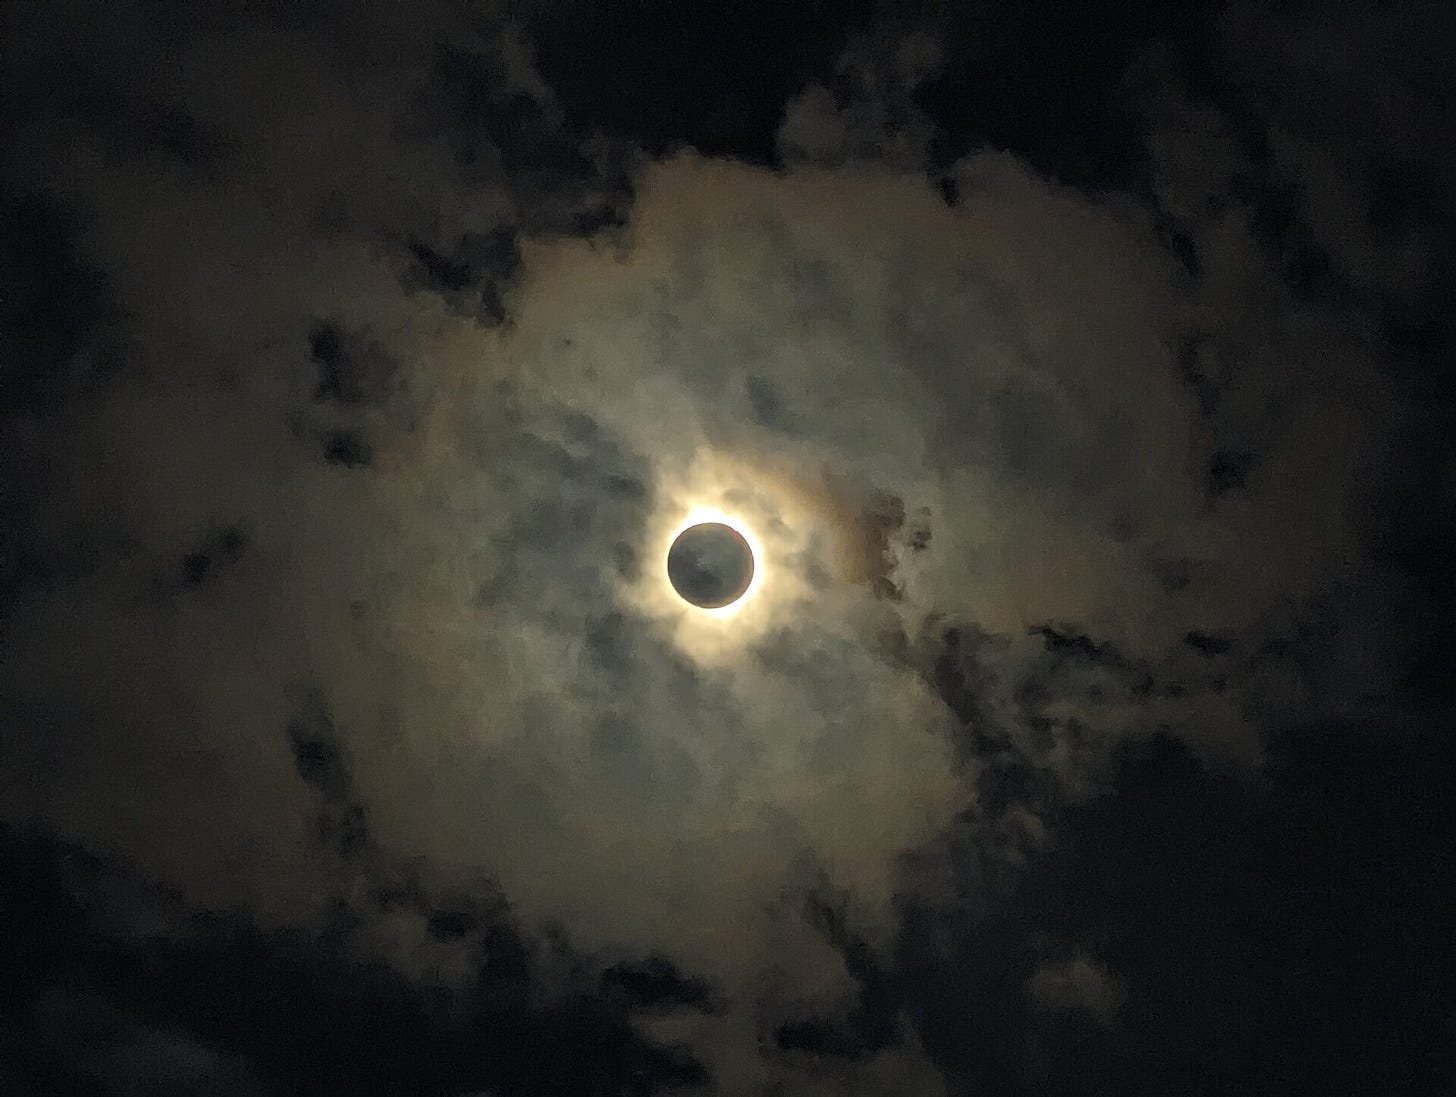 The eclipse photographed in a cloudy sky. In the center of the picture is a black circle ringed with yellow sunlight.